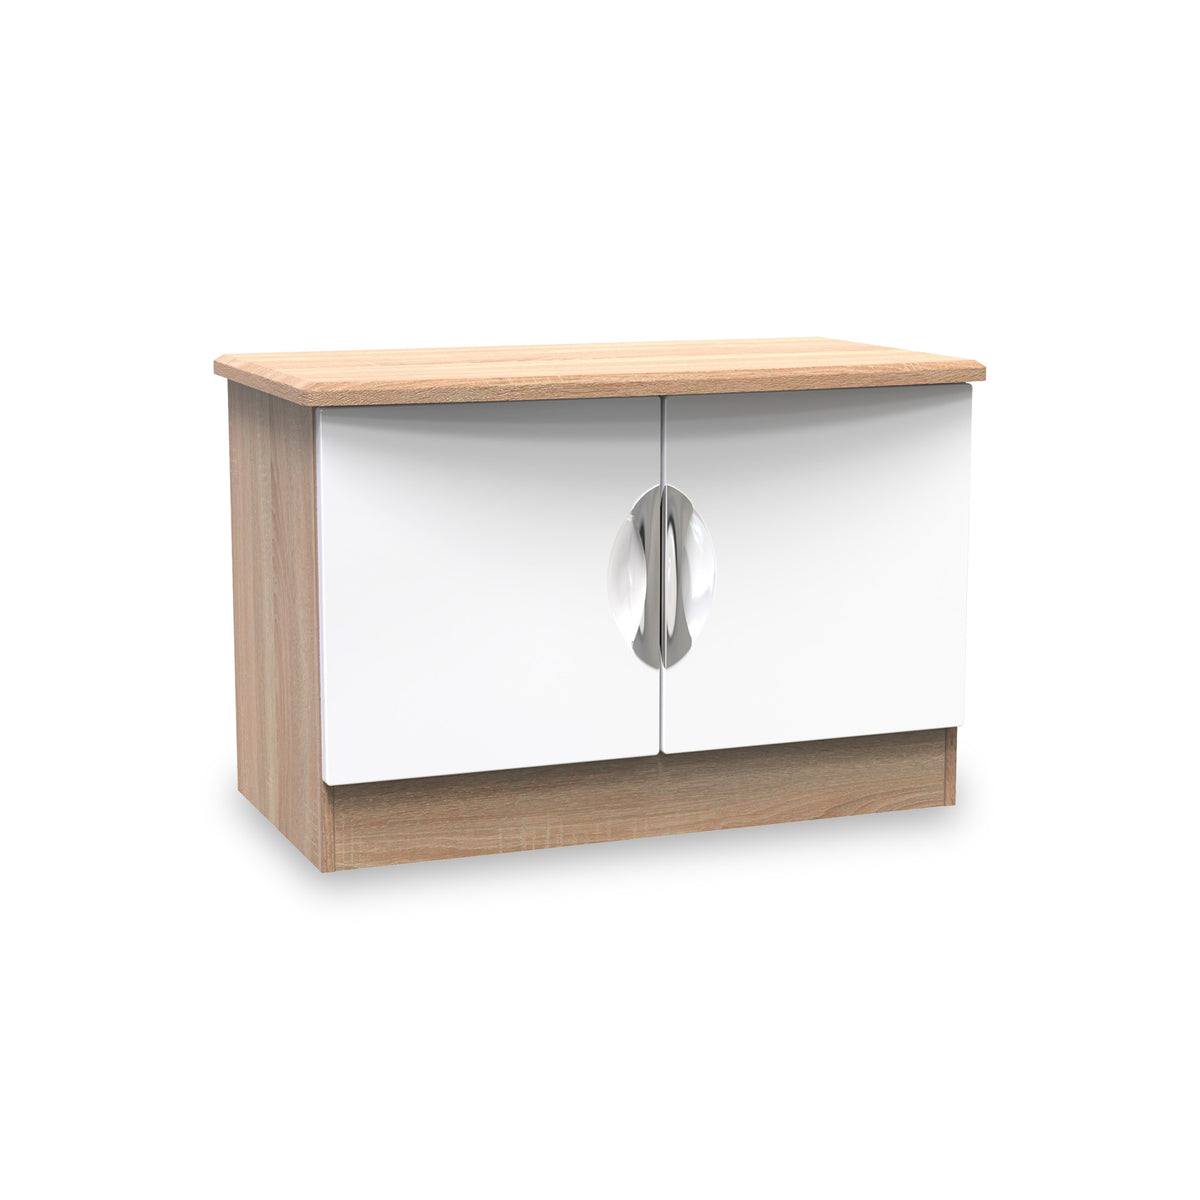 Beckett White Gloss and Light Wood 2 Door Compact TV Unit from Roseland